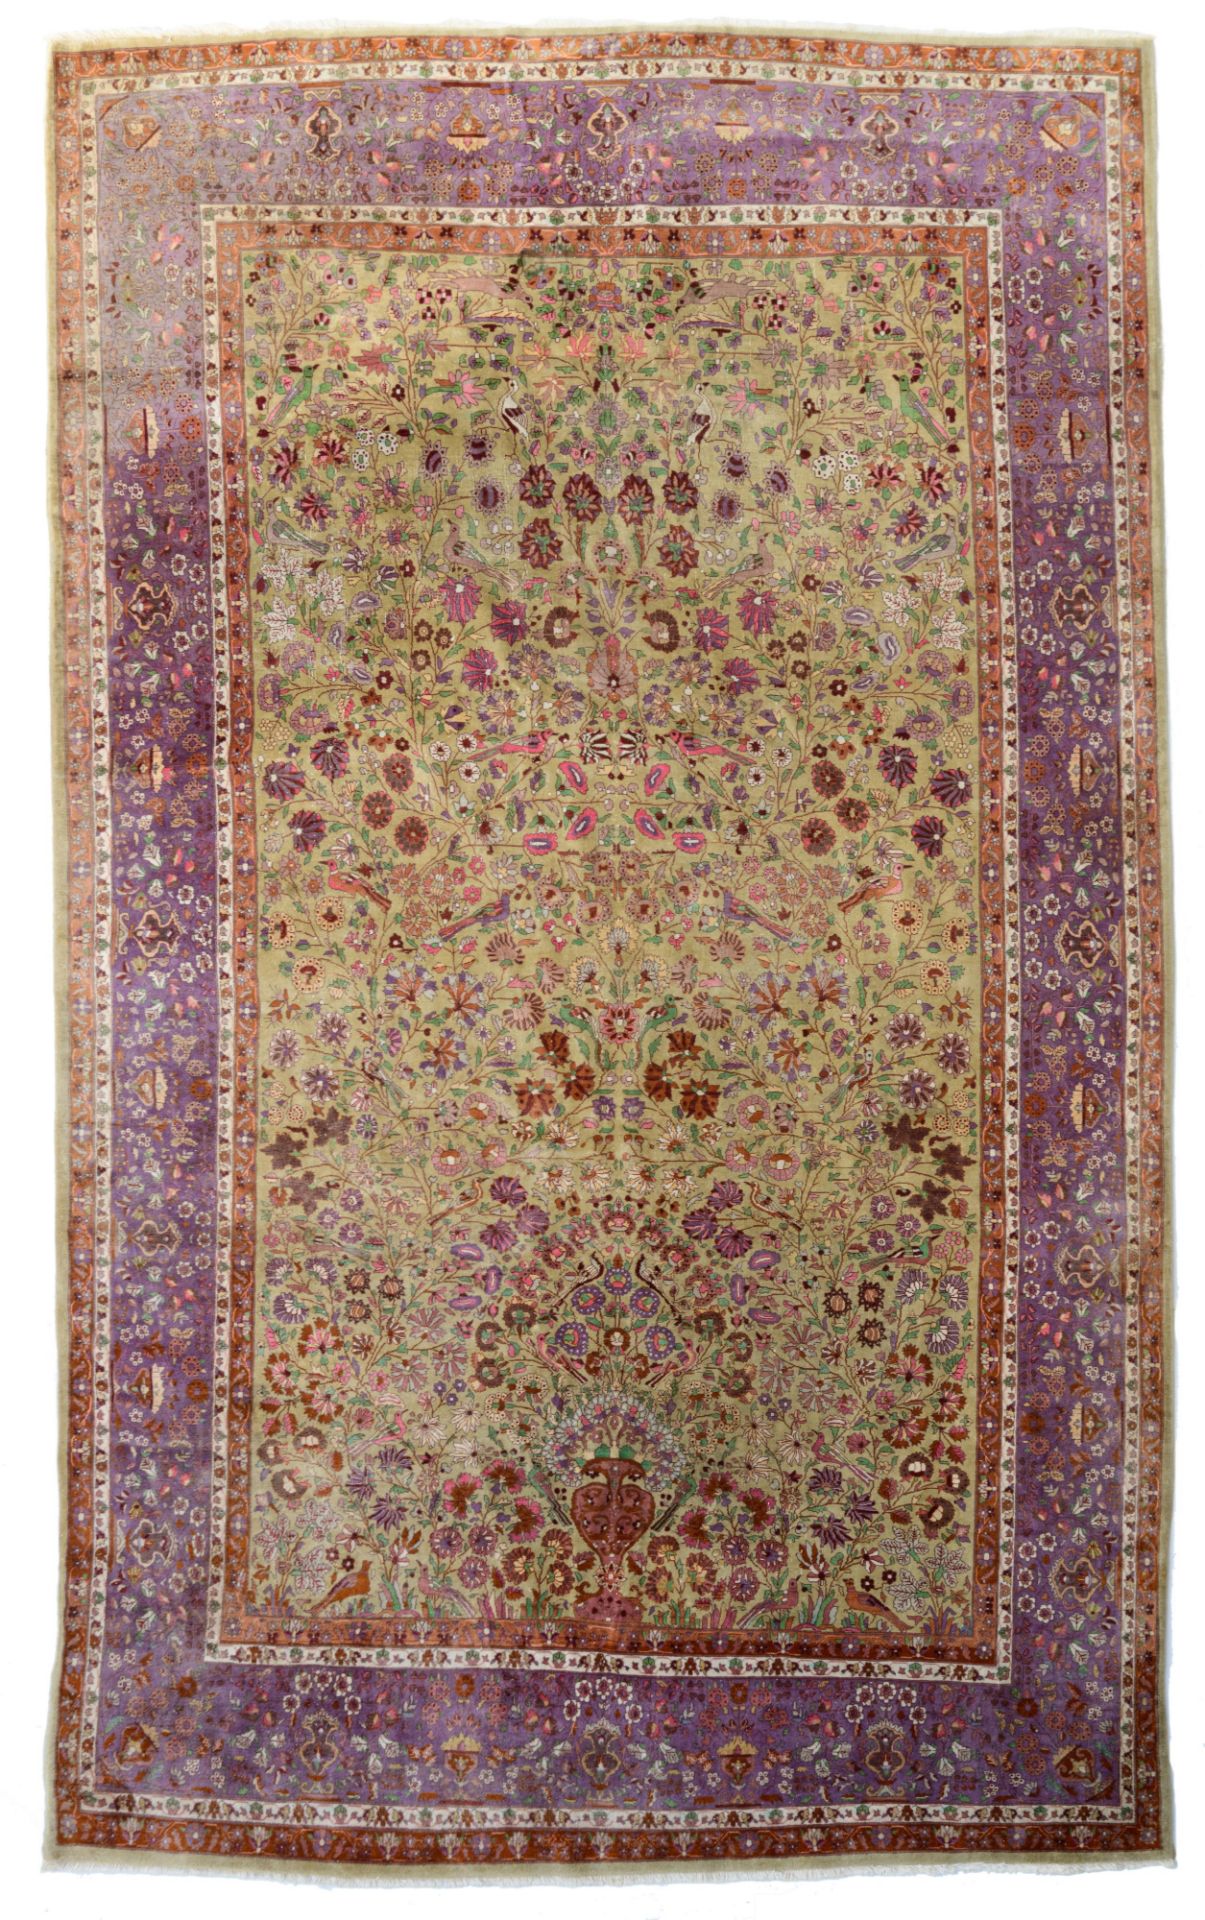 An Oriental rug, decorated with a flower vase and birds on flower branches, 223 x 362 cm